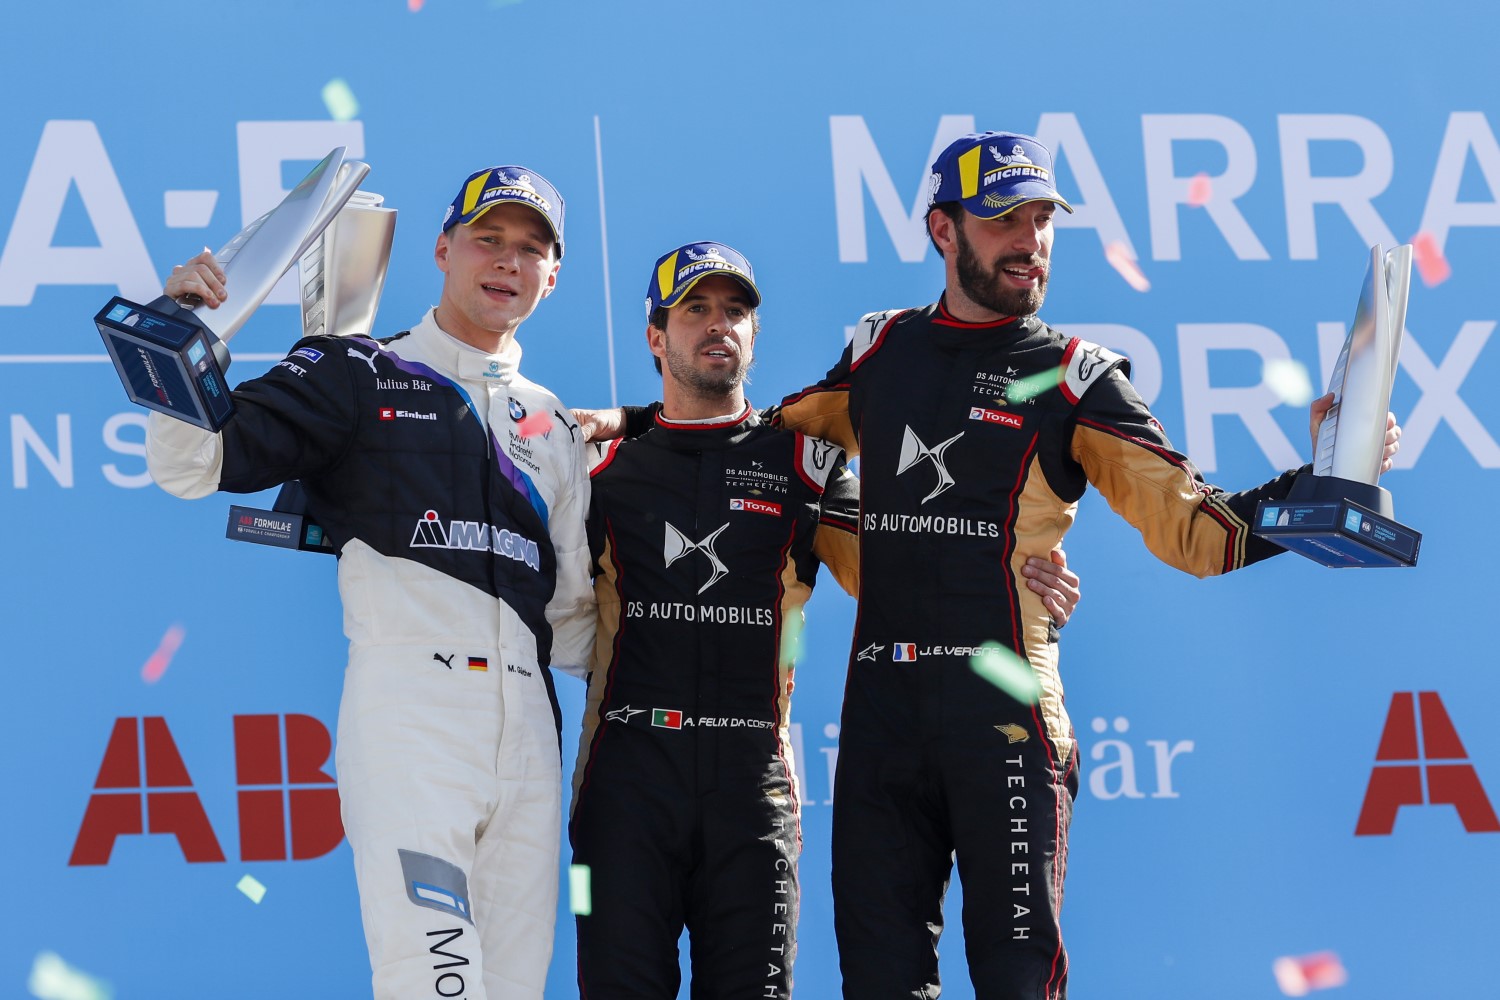 From left Guenter, Da Costa and Vergne